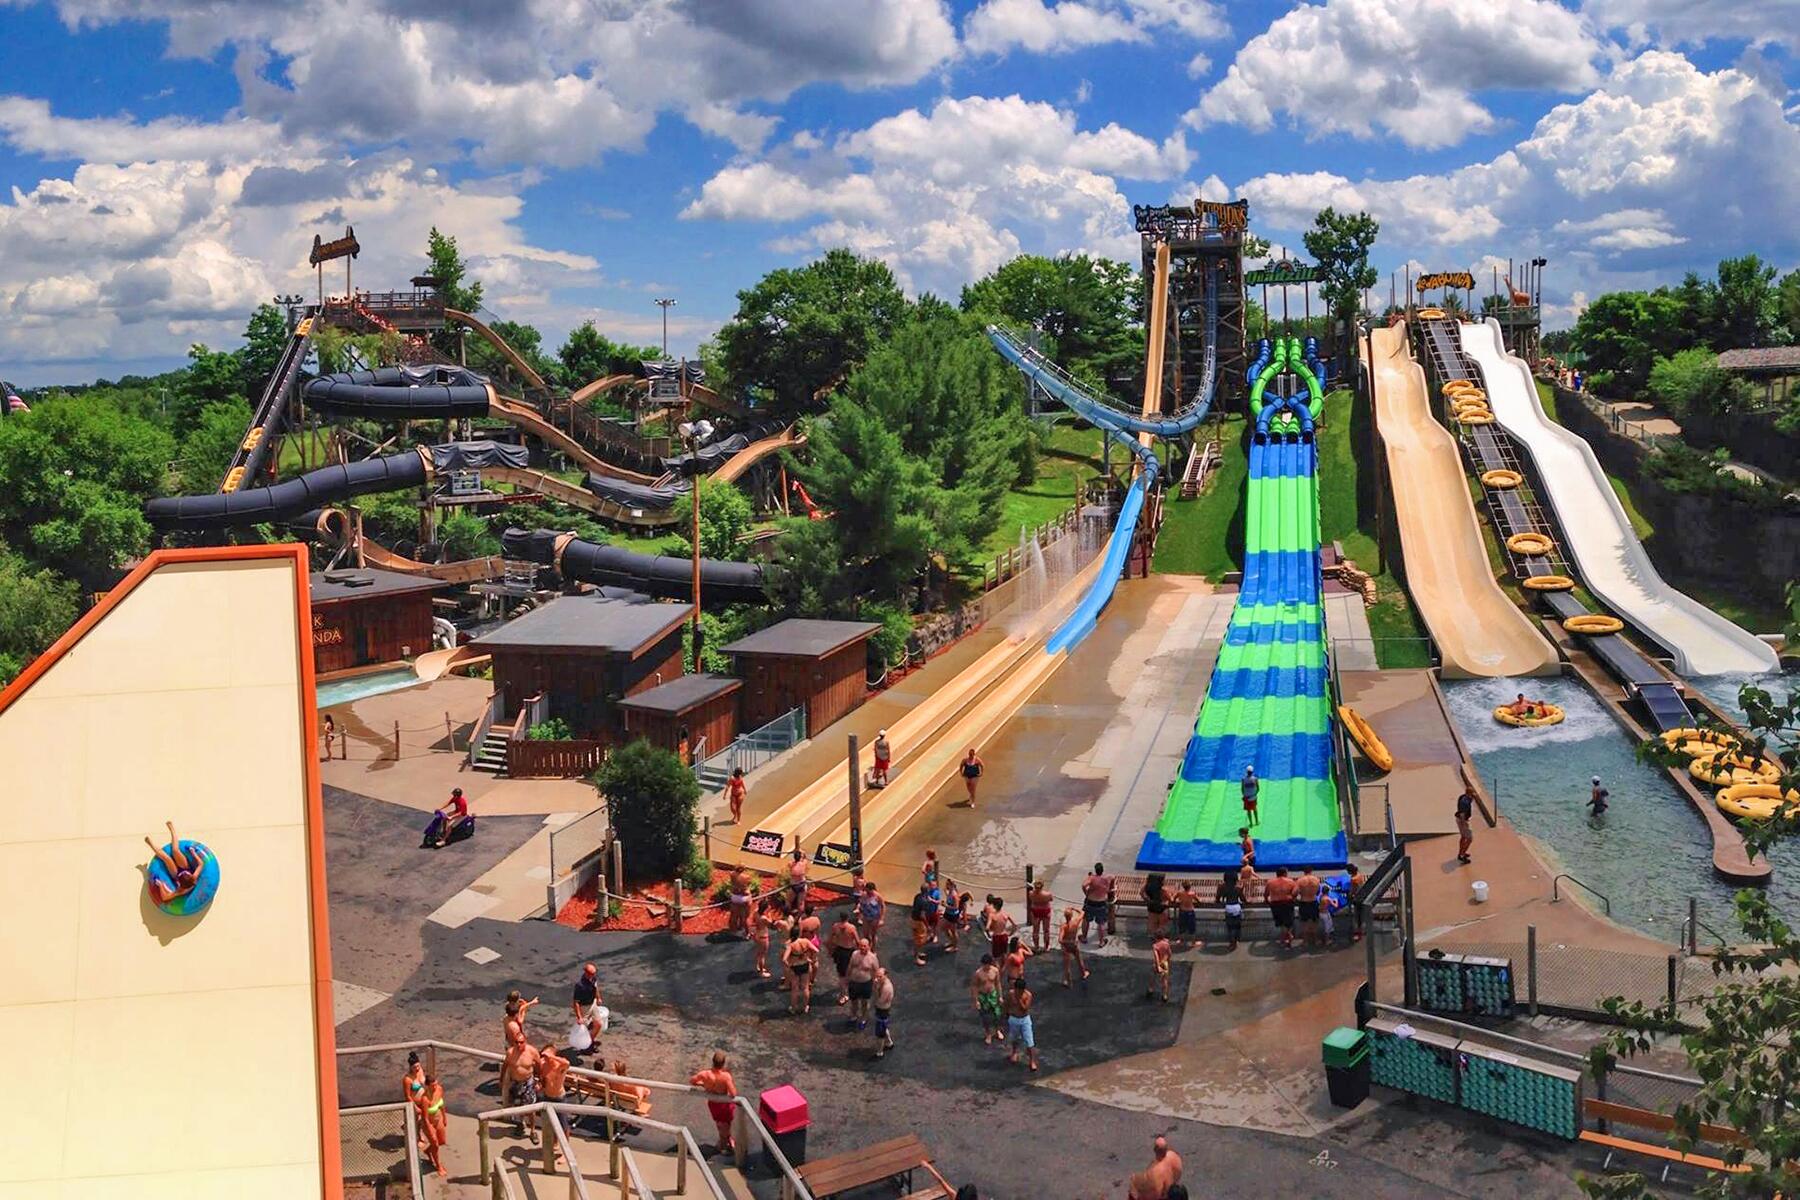 The Tallest Water Slides in North America